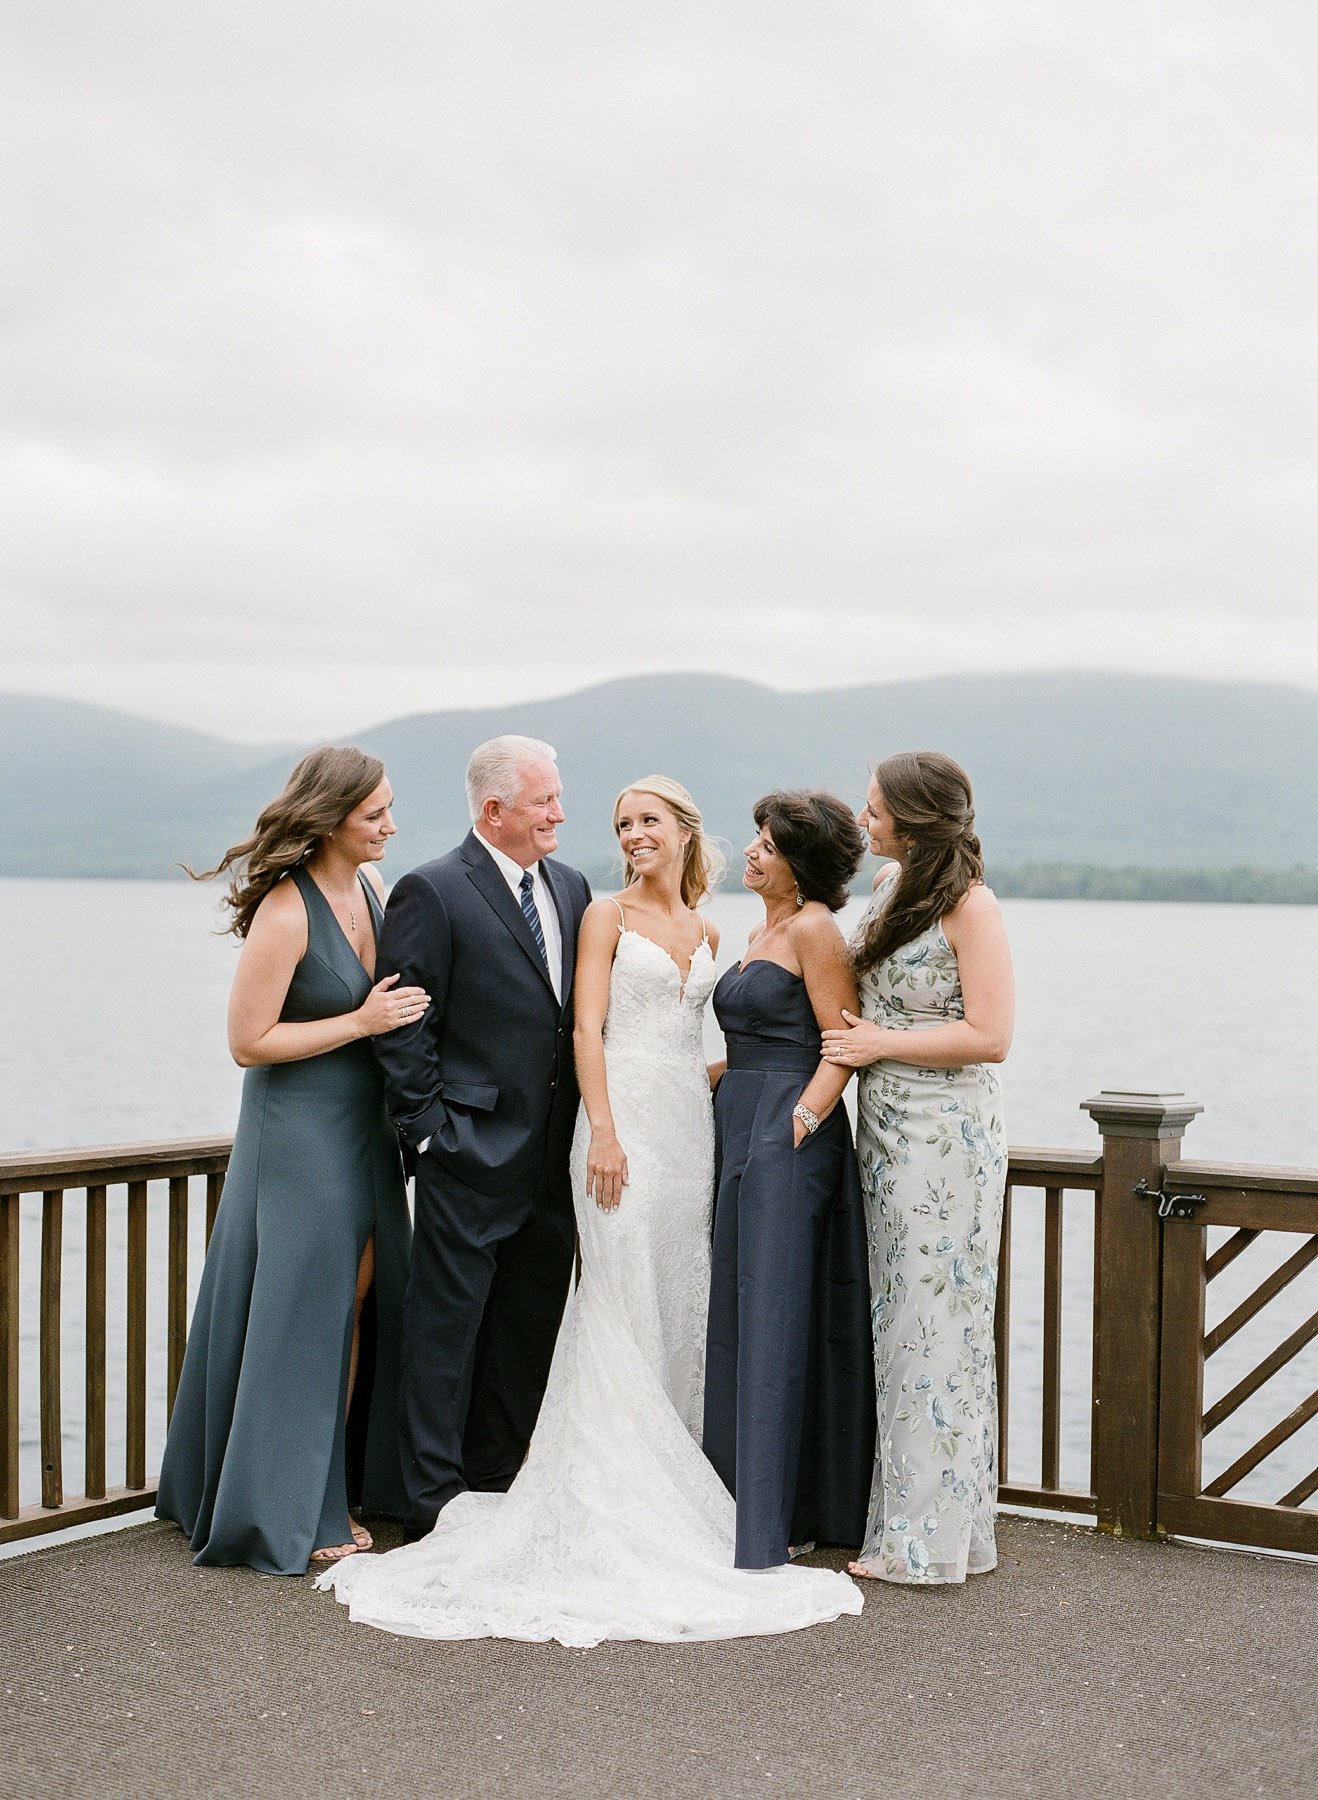 Private Island Upstate NY Wedding by Michelle Lange Photography-17.jpg